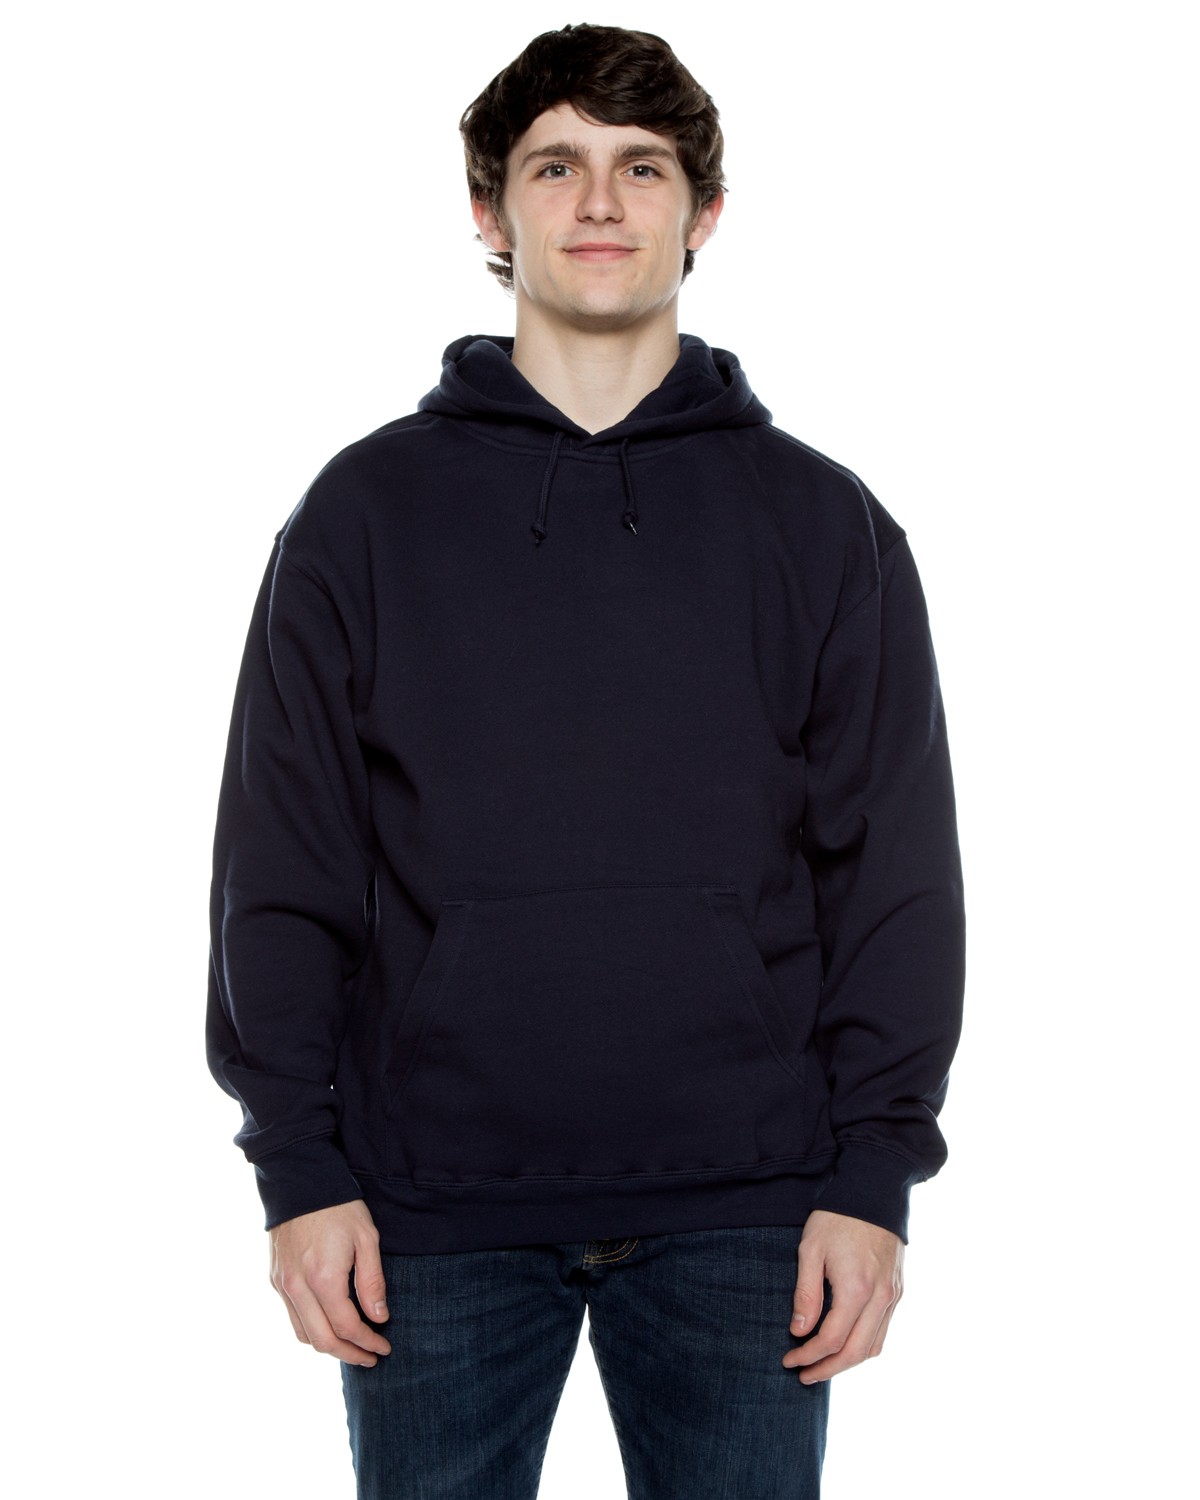 Beimar Drop Ship F102R Unisex 10 Oz. 80/20 Cotton/Poly Exclusive Hooded ...